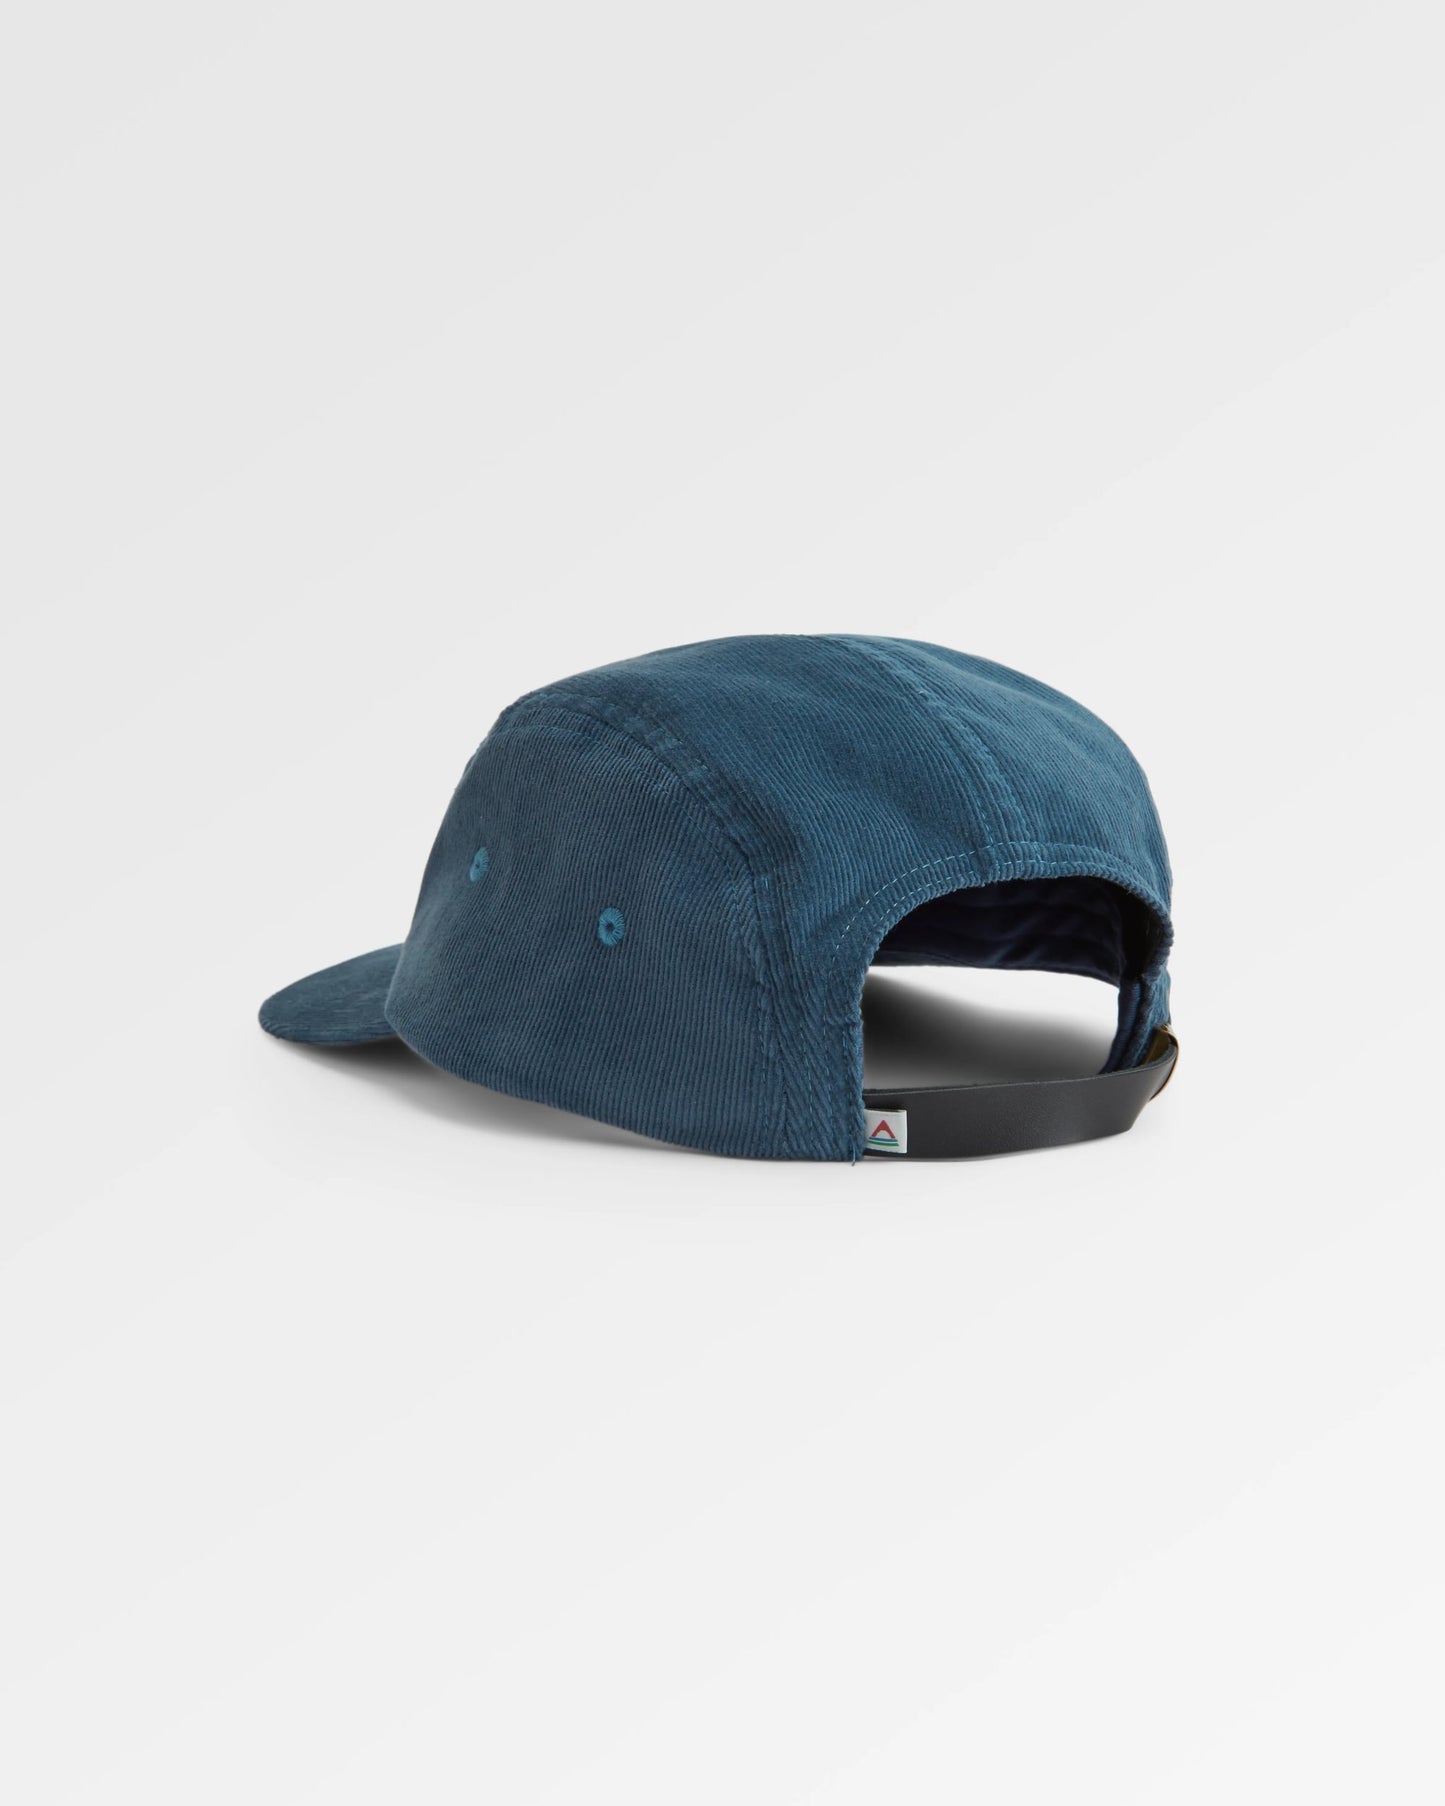 Fixie 5 Panel Recycled Cord Cap - Storm Grey